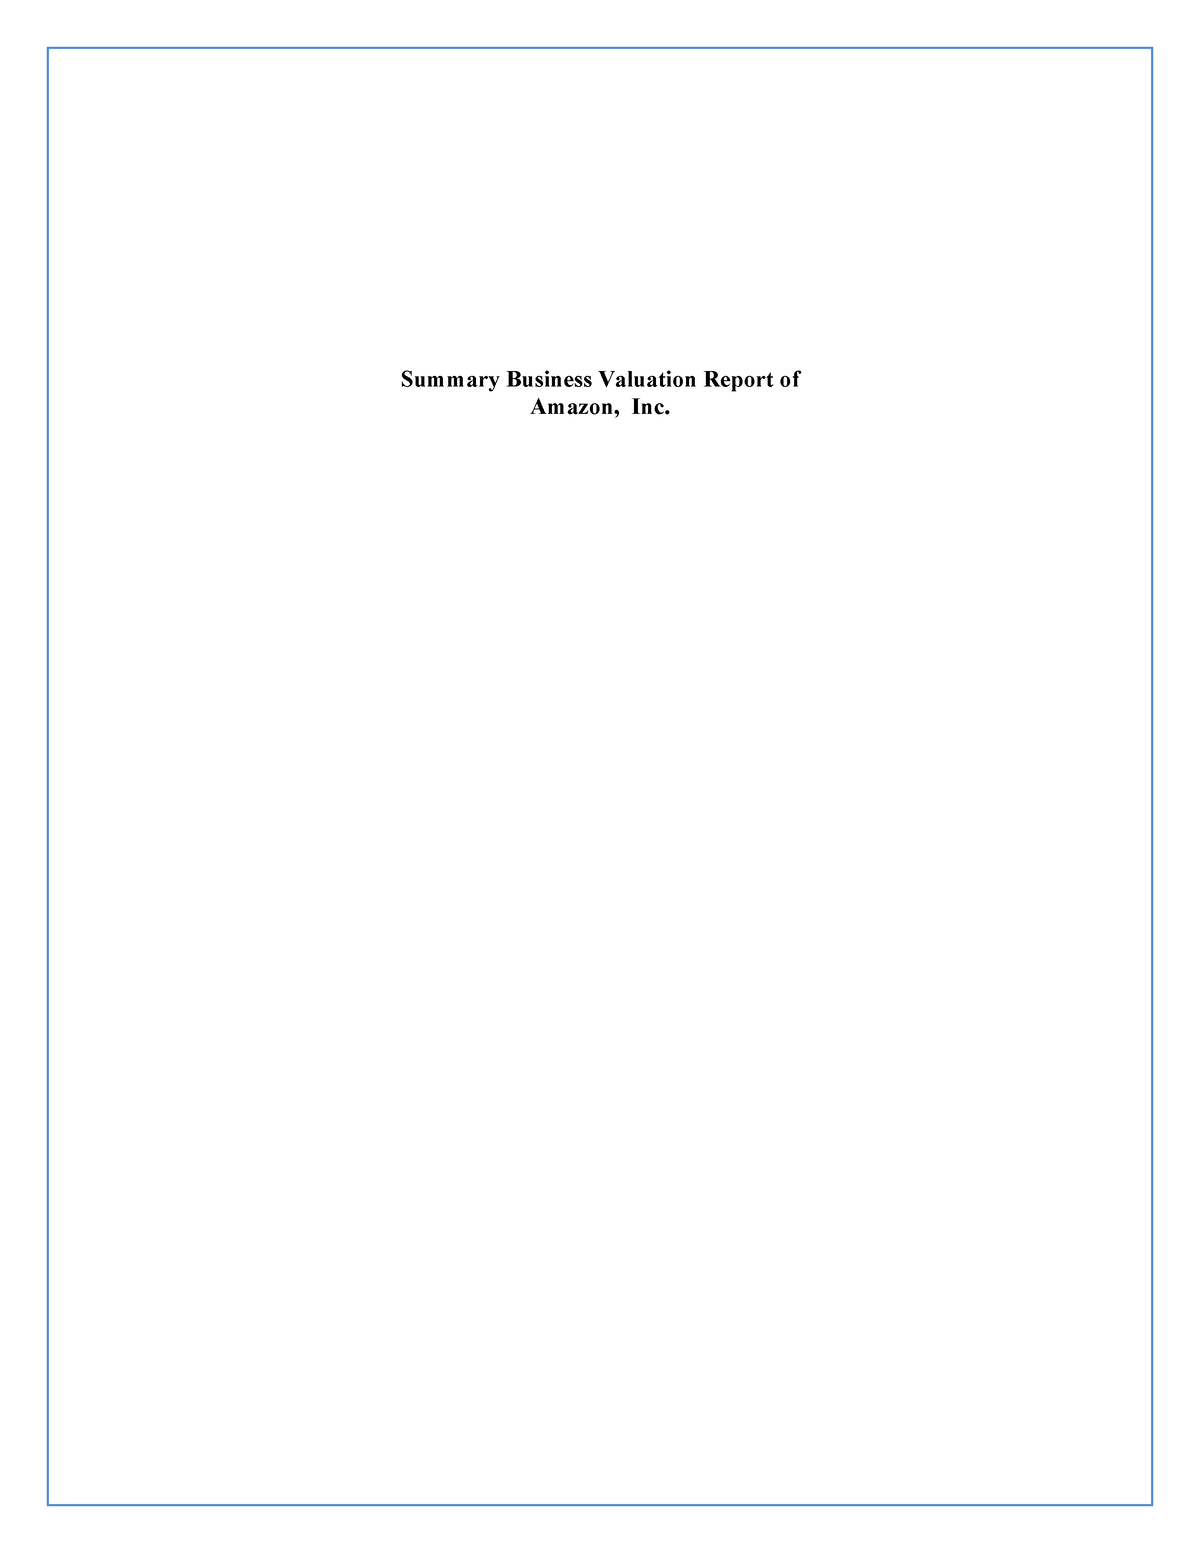 ACC 345 Business Valuation Report Template - Summary Business Valuation Report of Amazon, Inc. - Studocu